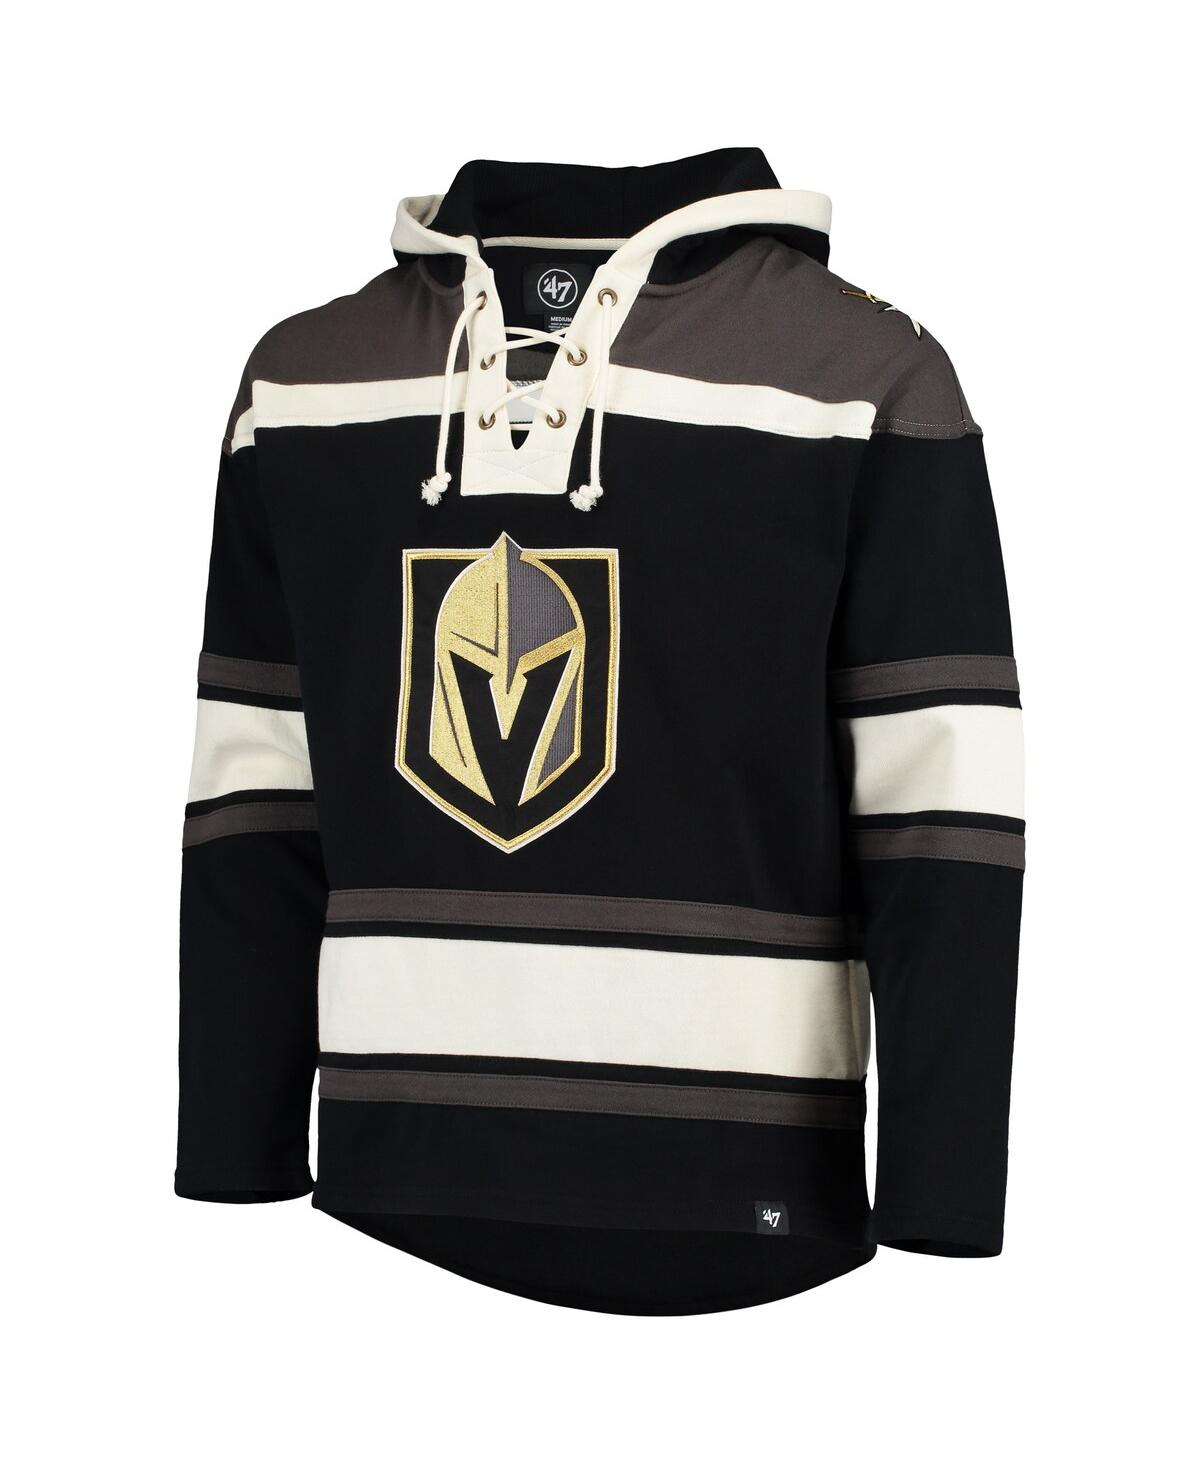 47 Men's Vegas Golden Knights Superior Lacer Pullover Hoodie